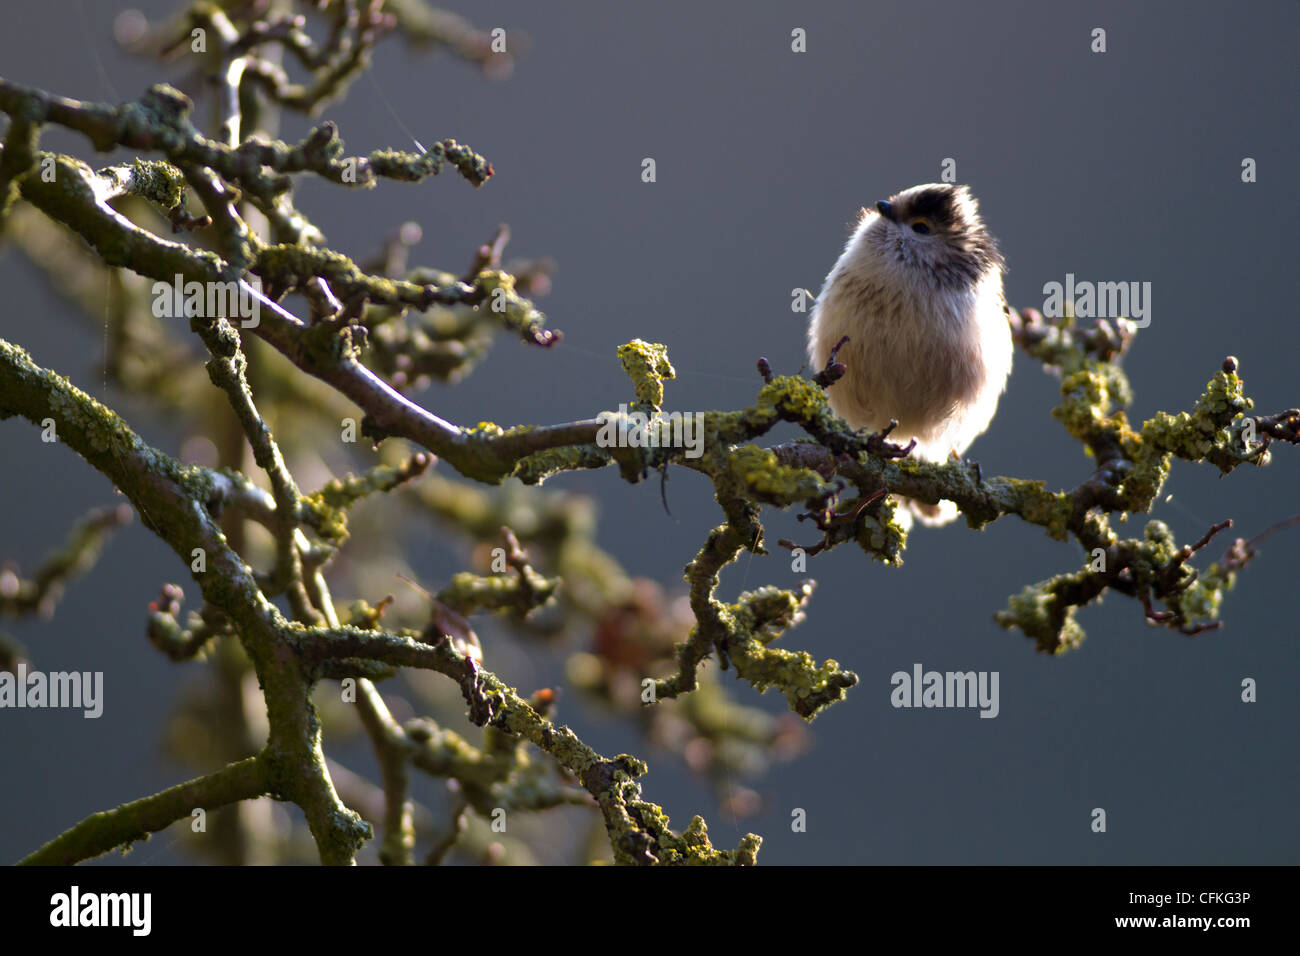 Long-tailed Tit on gnarled branch Stock Photo